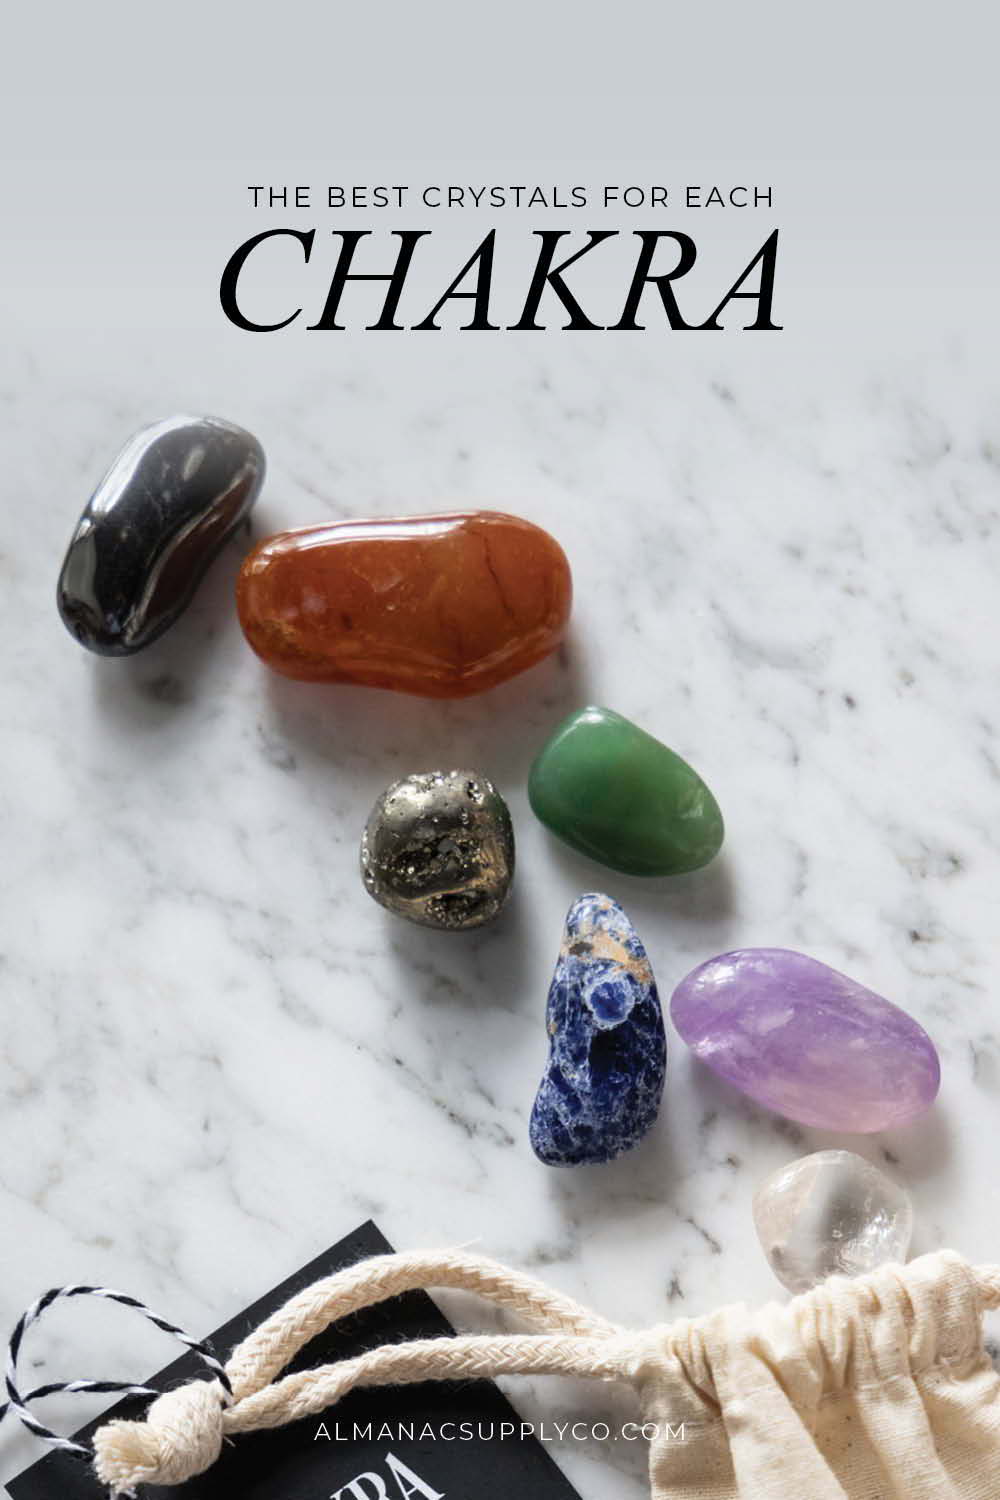 What are the best crystals for each chakra?